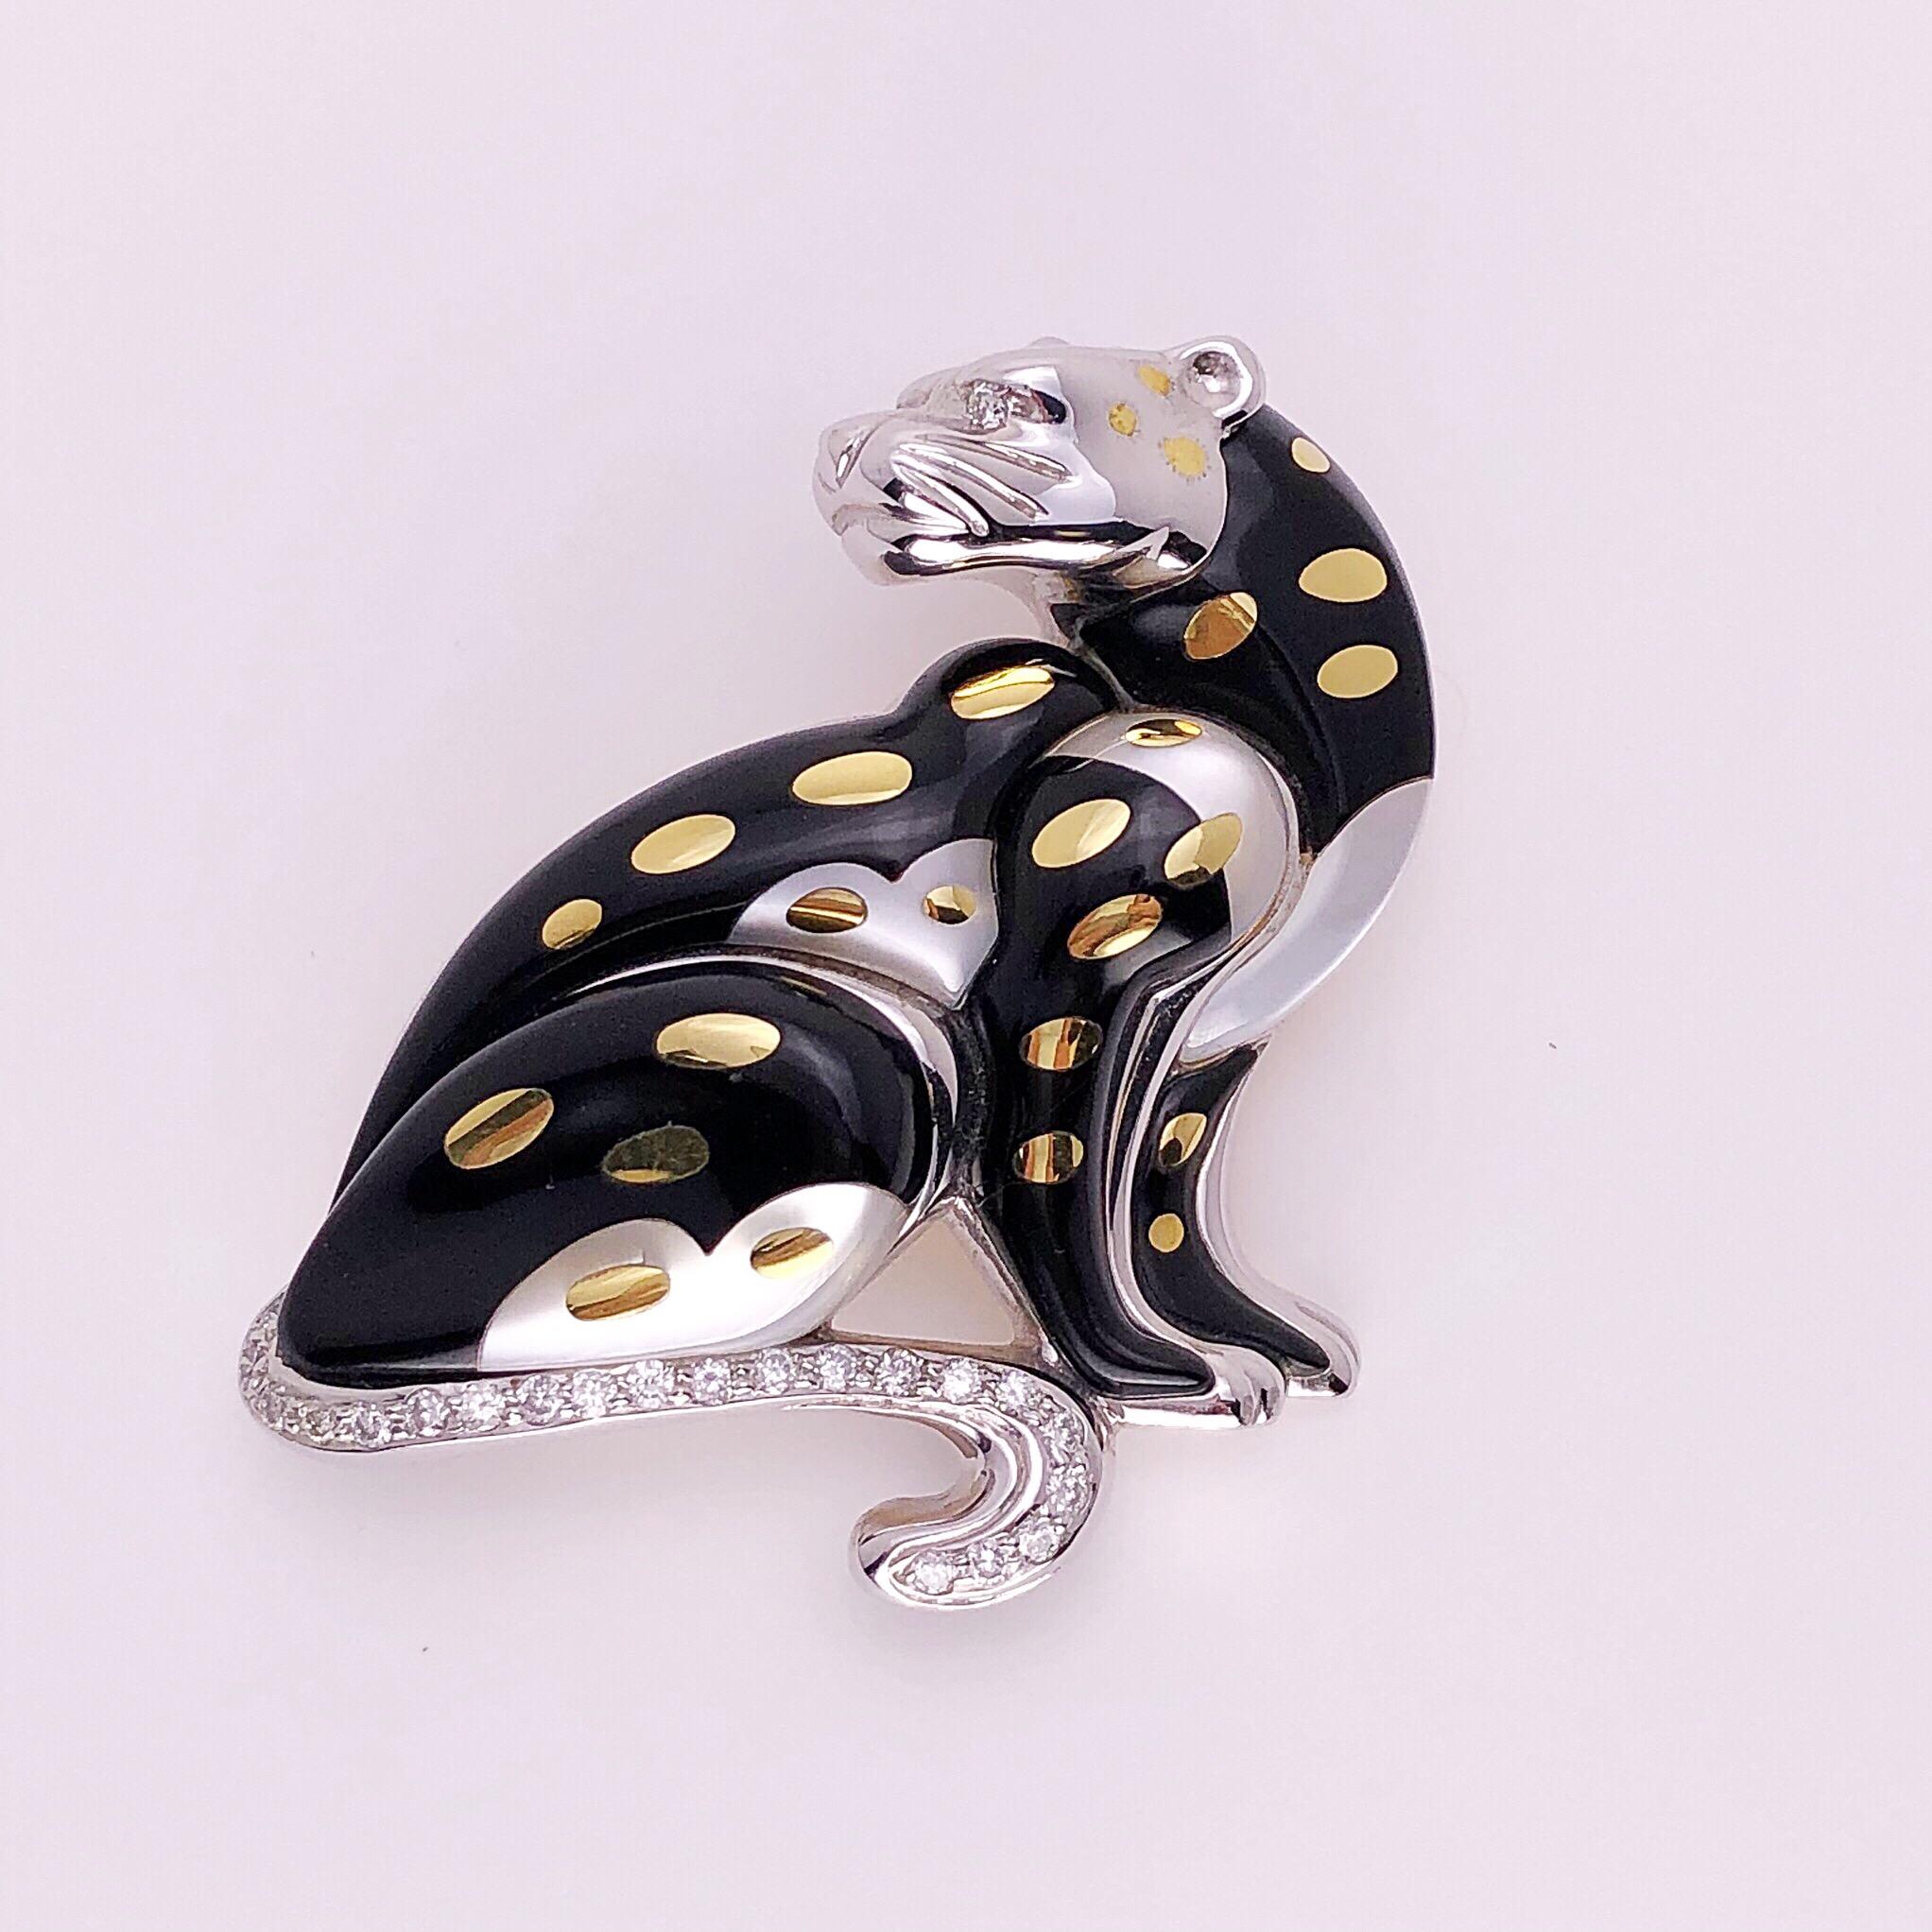 Modern Asch Grossbardt Platinum & 18KT Gold Leopard Brooch With Onyx & Mother of Pearl For Sale